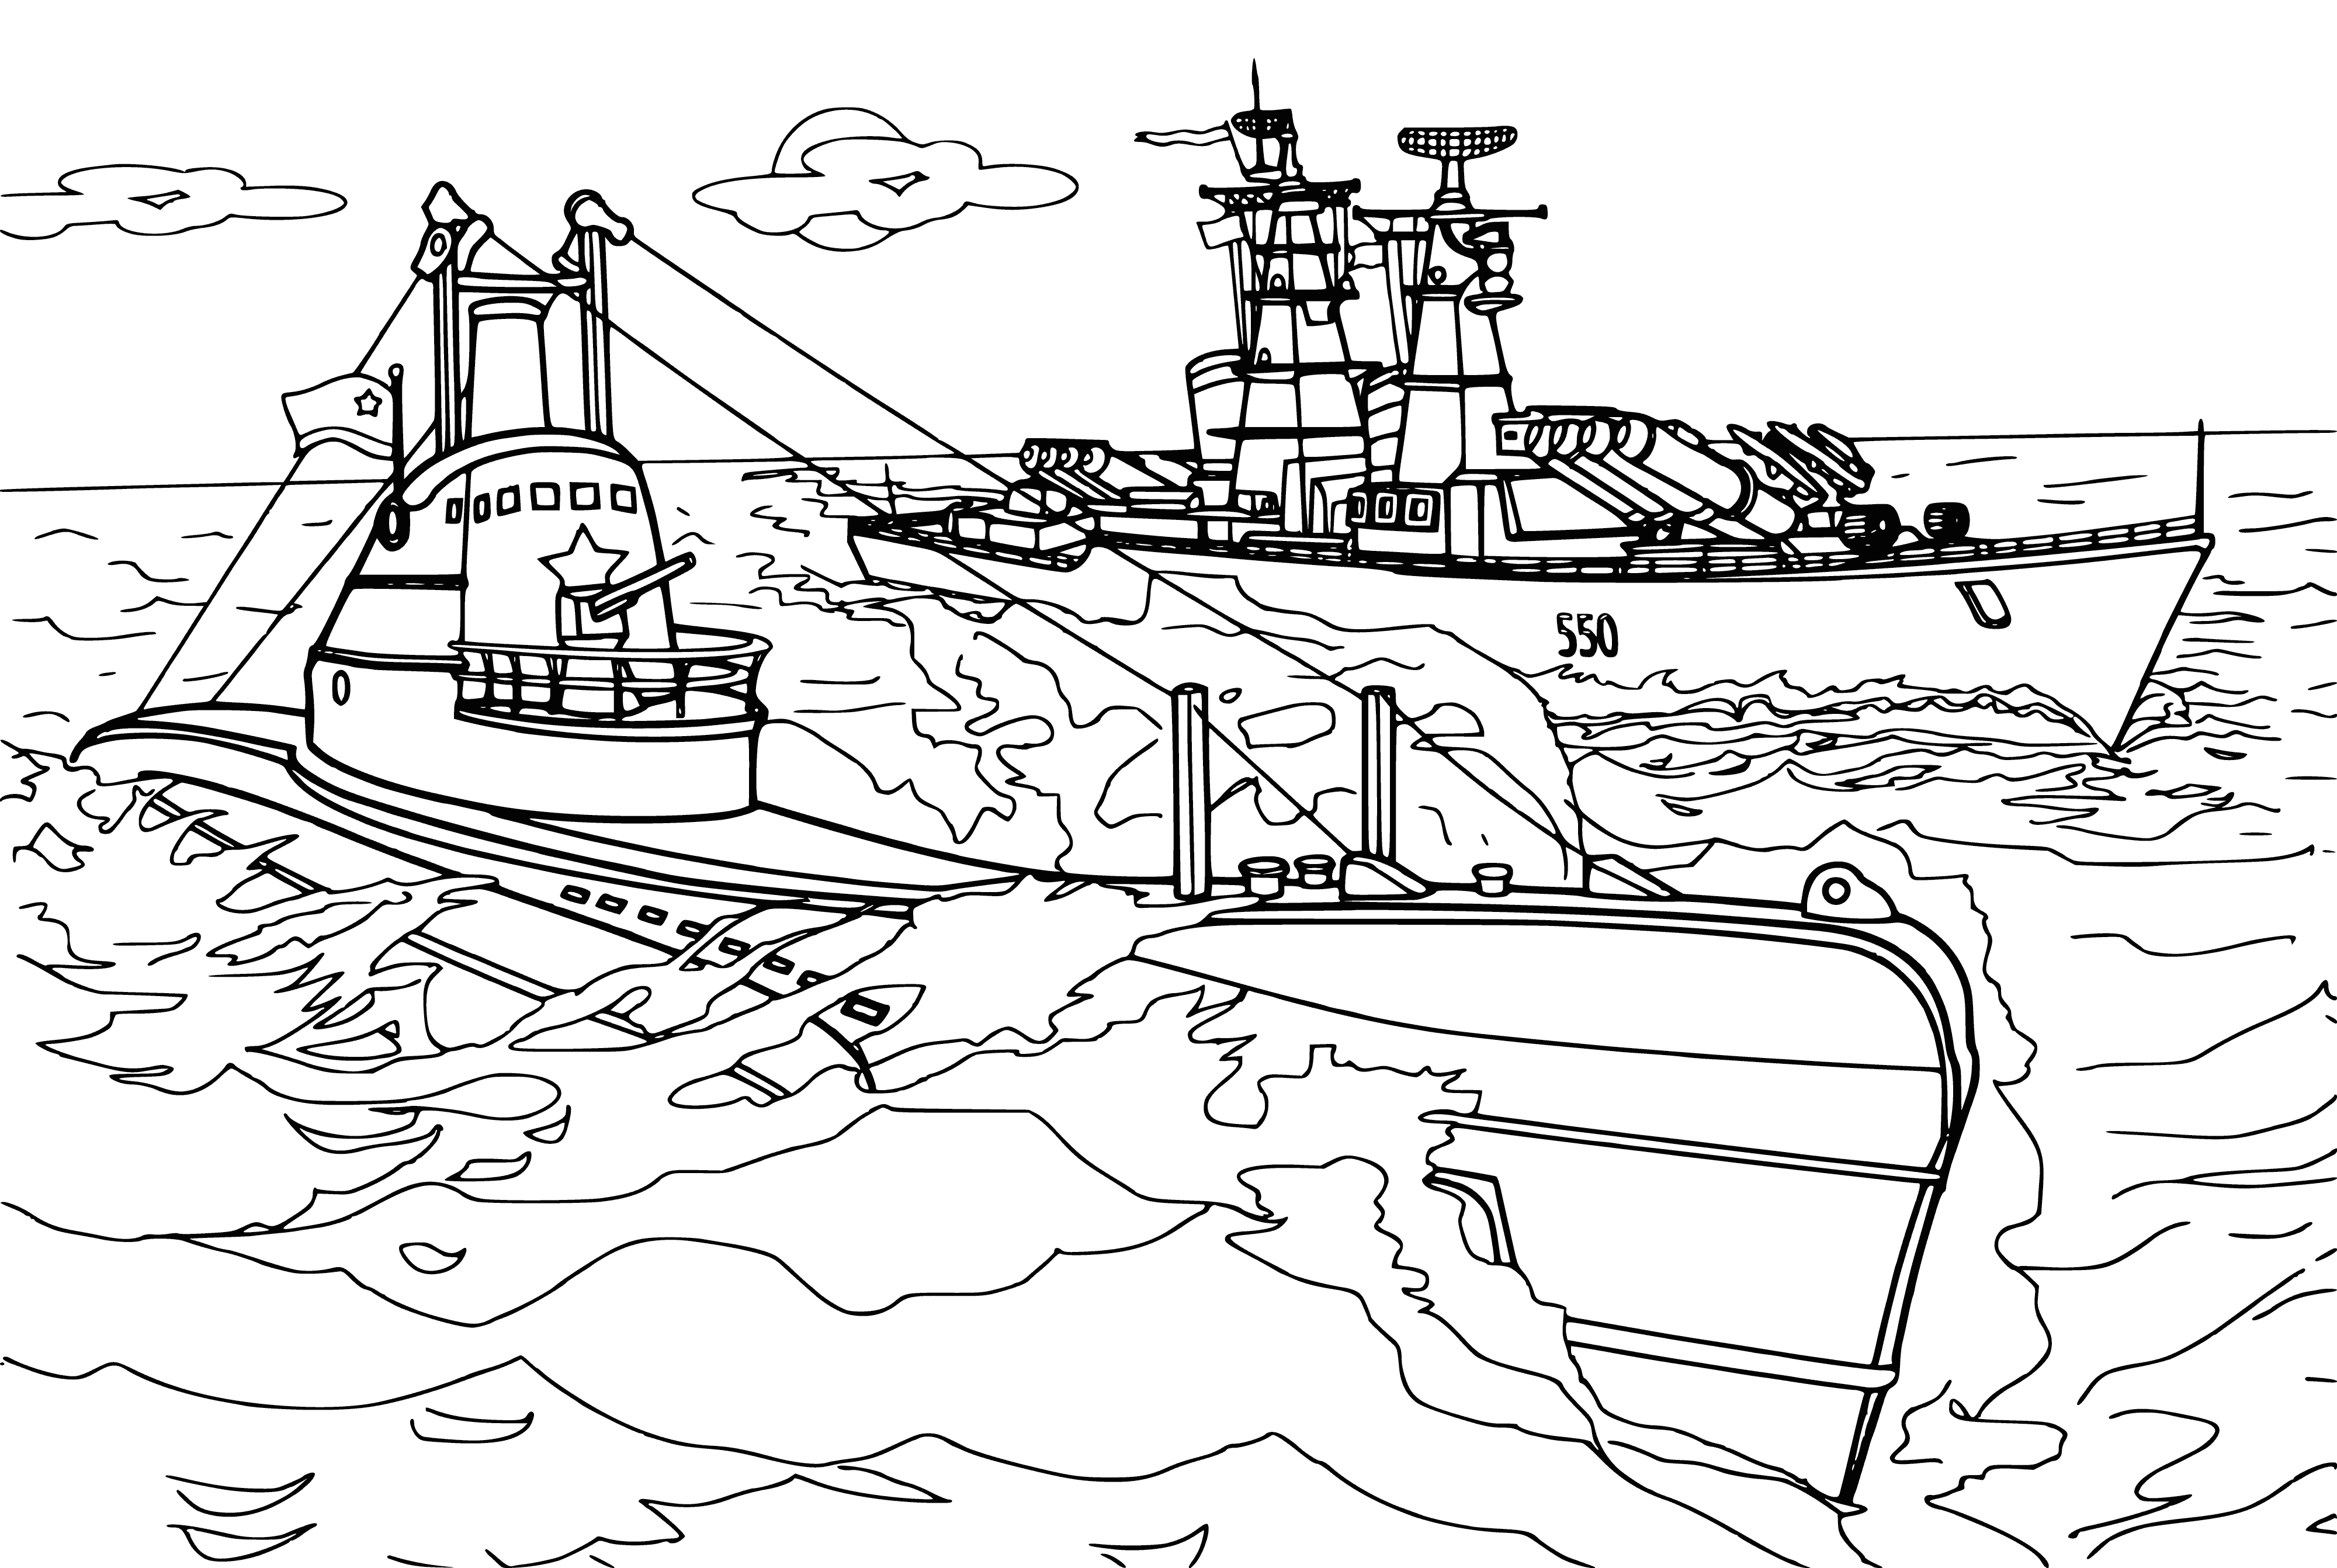 coloring page: Submariner coloring page: a gray sub w/ green & brown camo, a conning tower, & six torpedo tubes on each side. It appears to be surfaced.